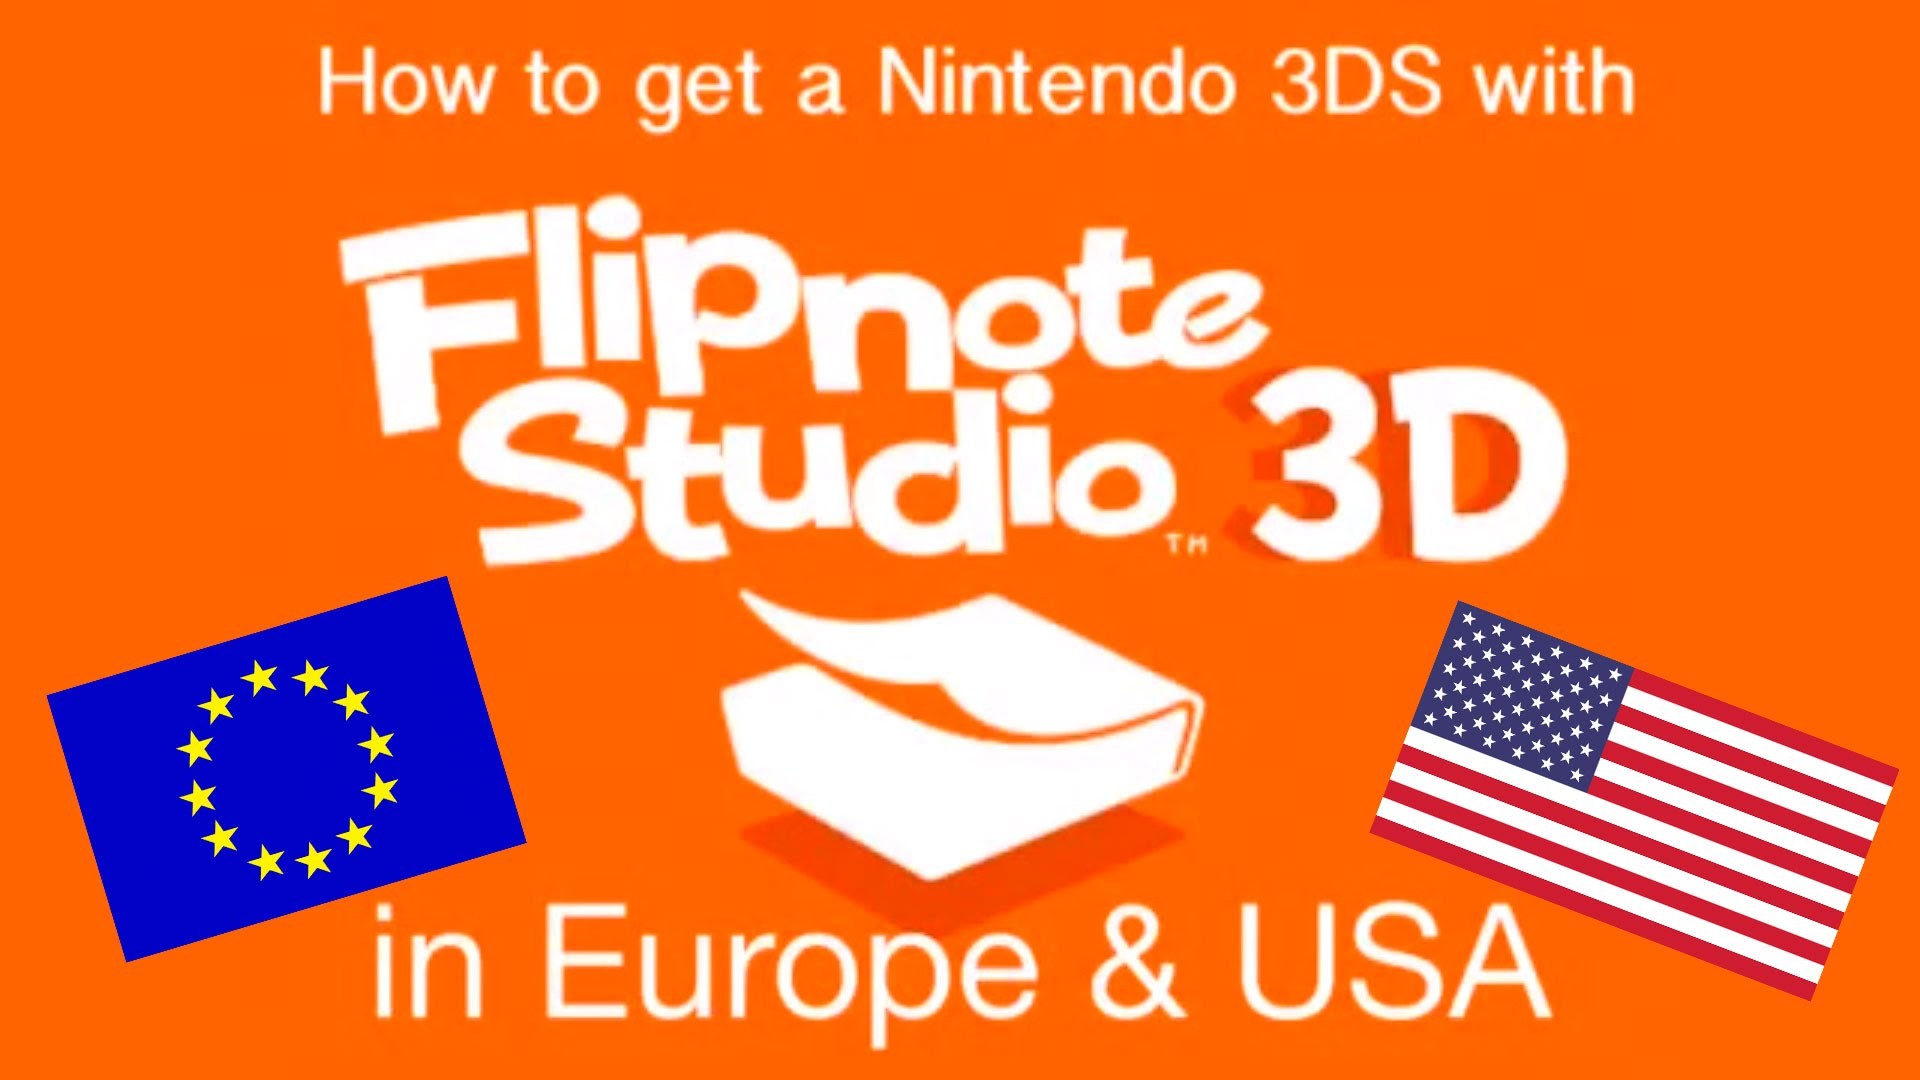 How to get a Nintendo 3DS with Flipnote Studio 3DS in Europe and USA,  geezerdk